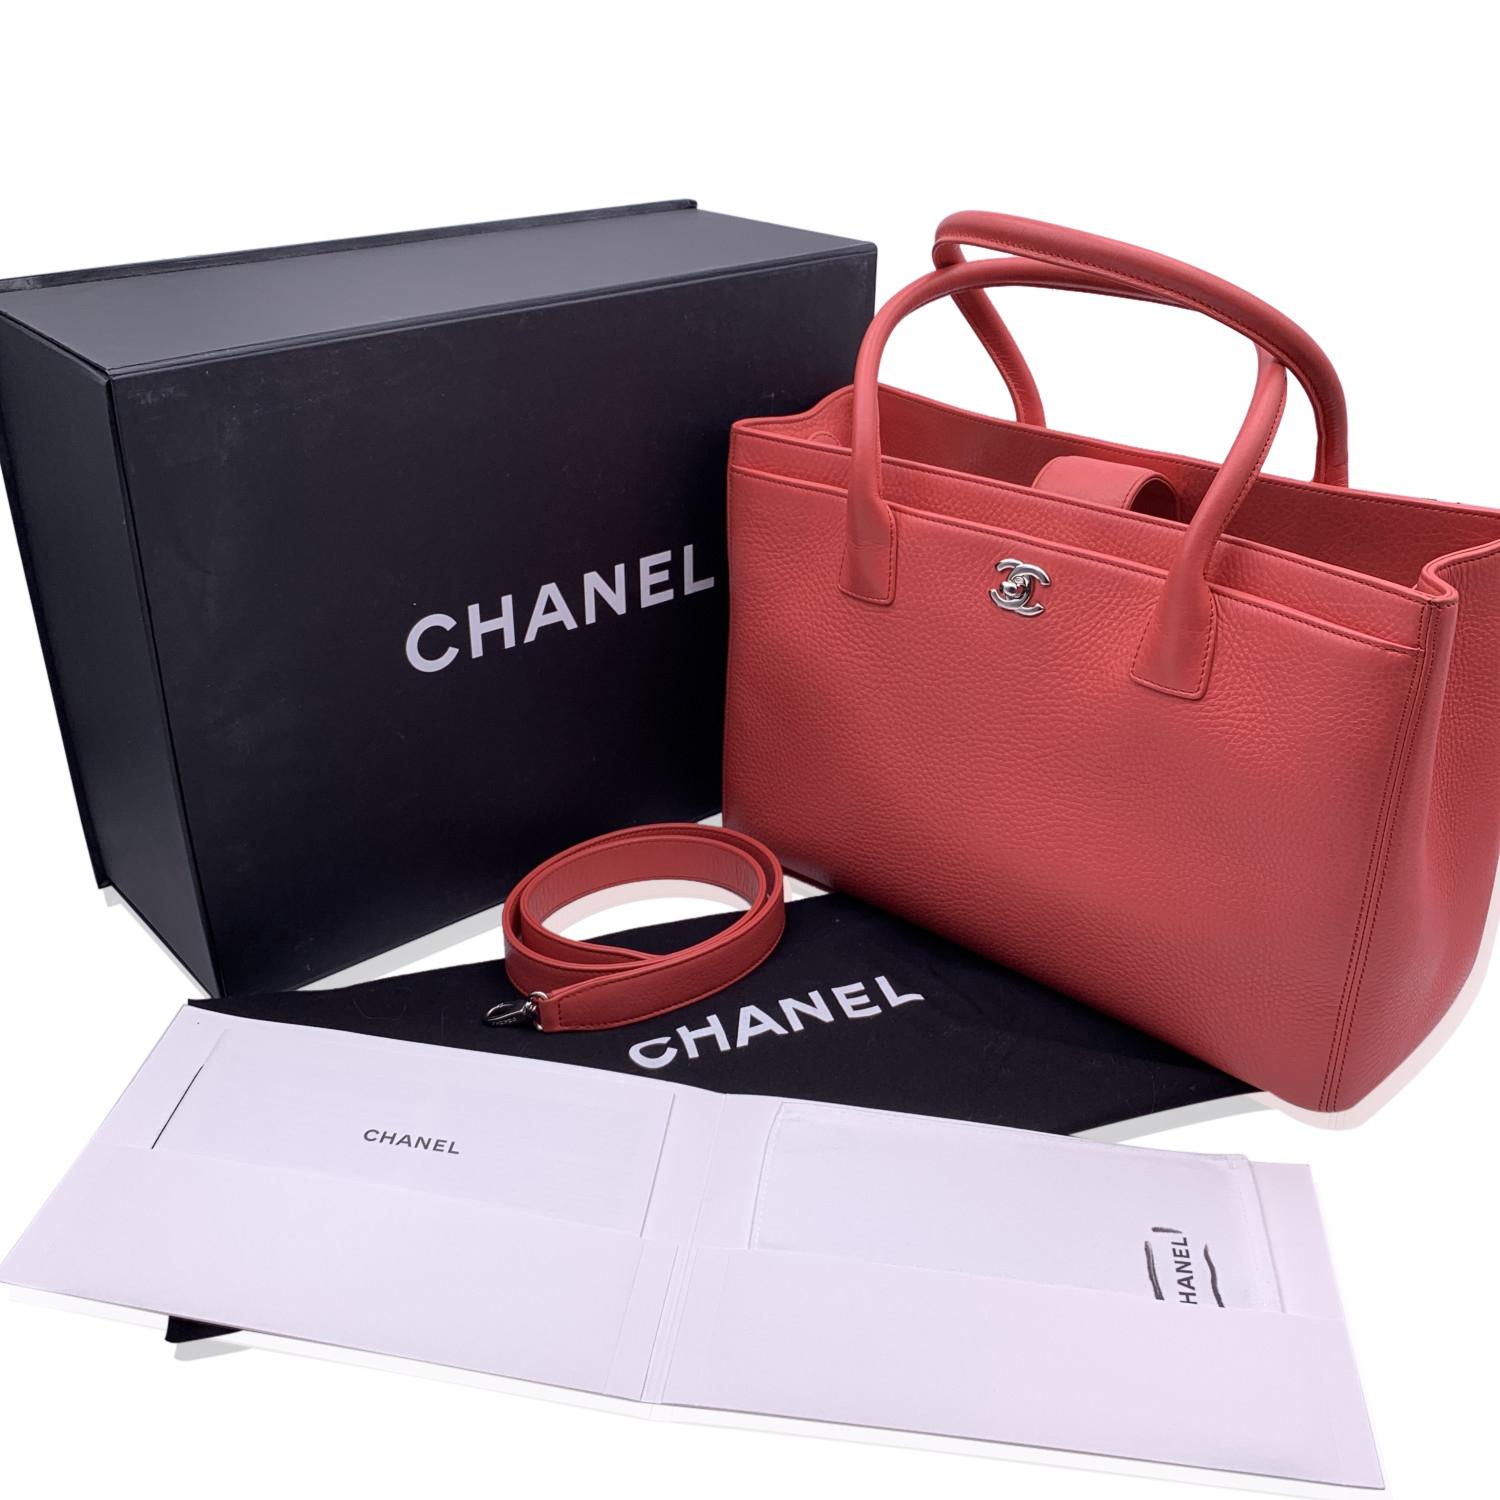 Stunning Chanel 'Executive' Tote Bag in pink pebbled leather. Silver metal CC - CHANEL logo on the front. Double top handles and removable shoulder strap. Double magnetic button closure on top. Front and rear pocket. Grey grosgrain lining. 2 side